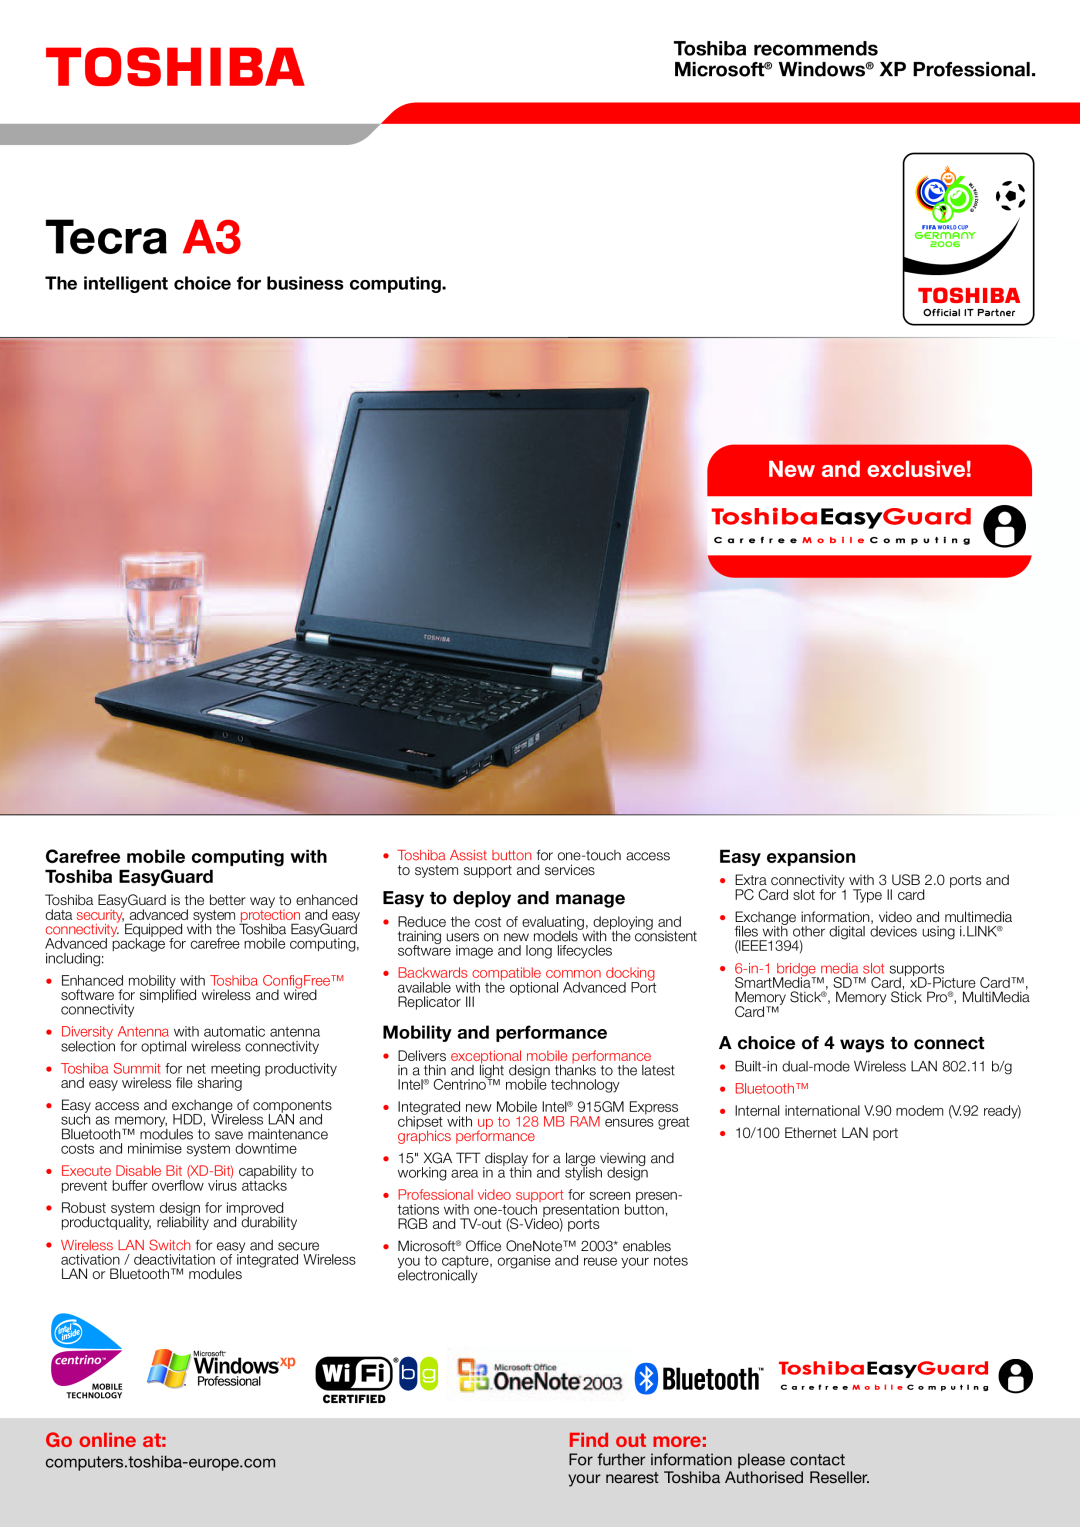 Toshiba Tecra A3 manual Go online at, Find out more, computers.toshiba-europe.com, For further information please contact 